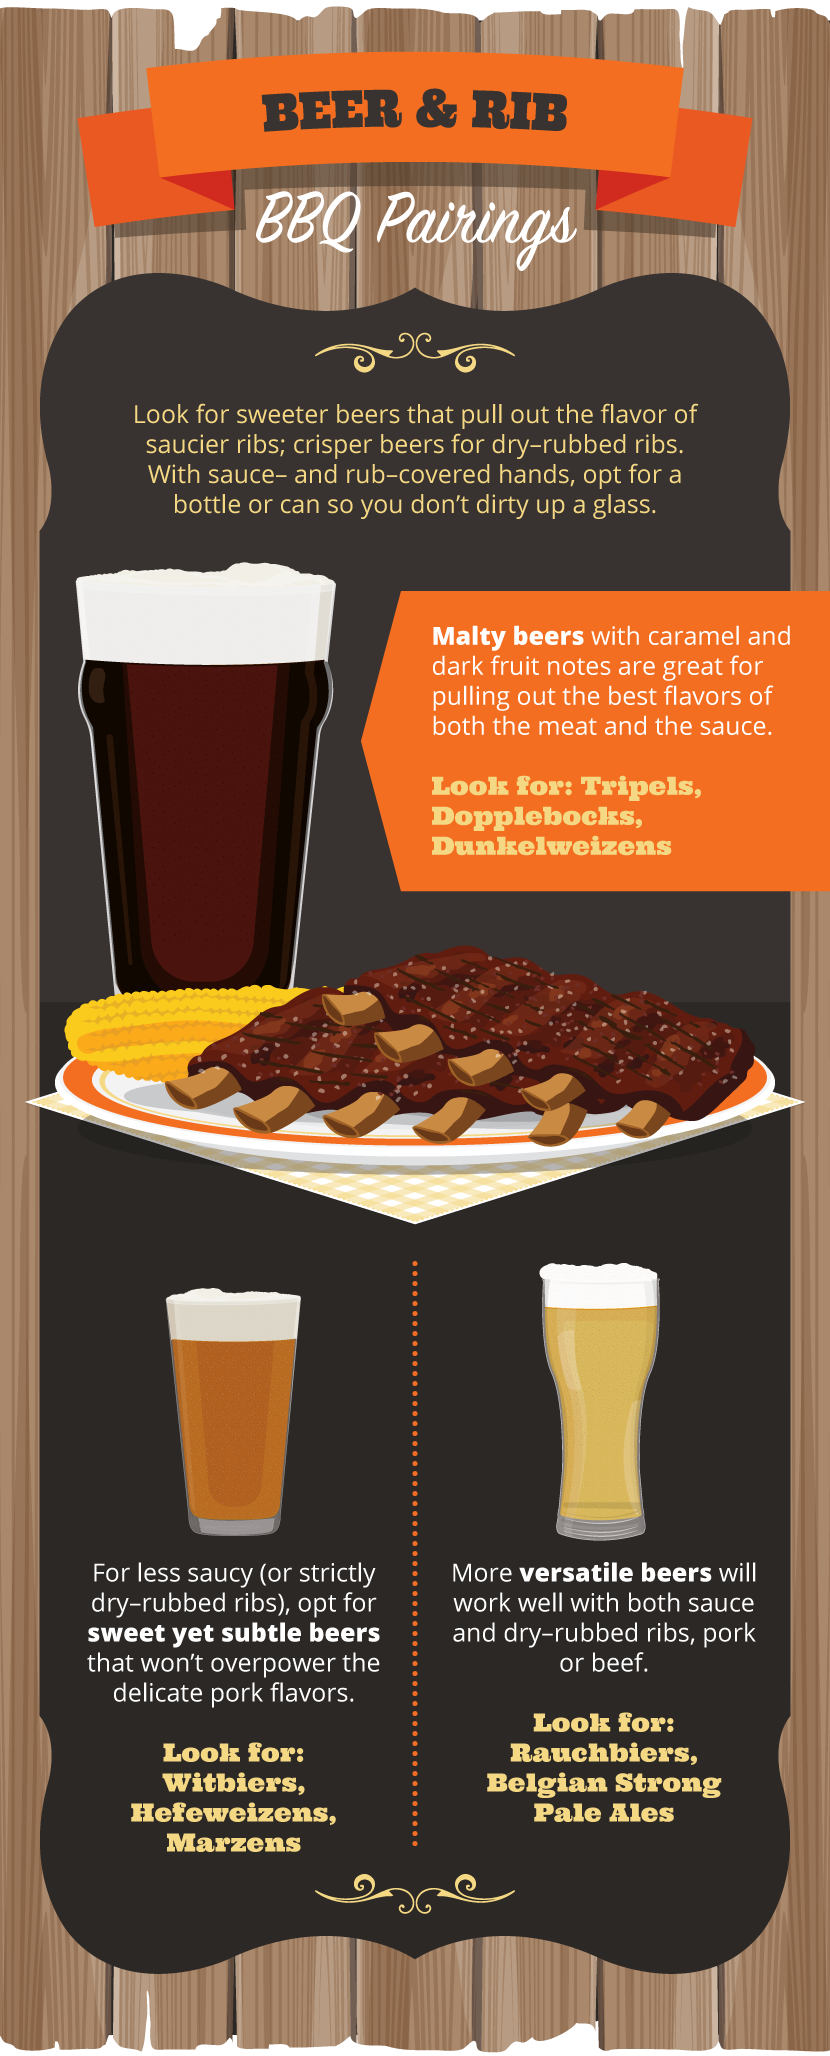 Craft Beer For Ribs - Craft Beer and BBQ Pairings